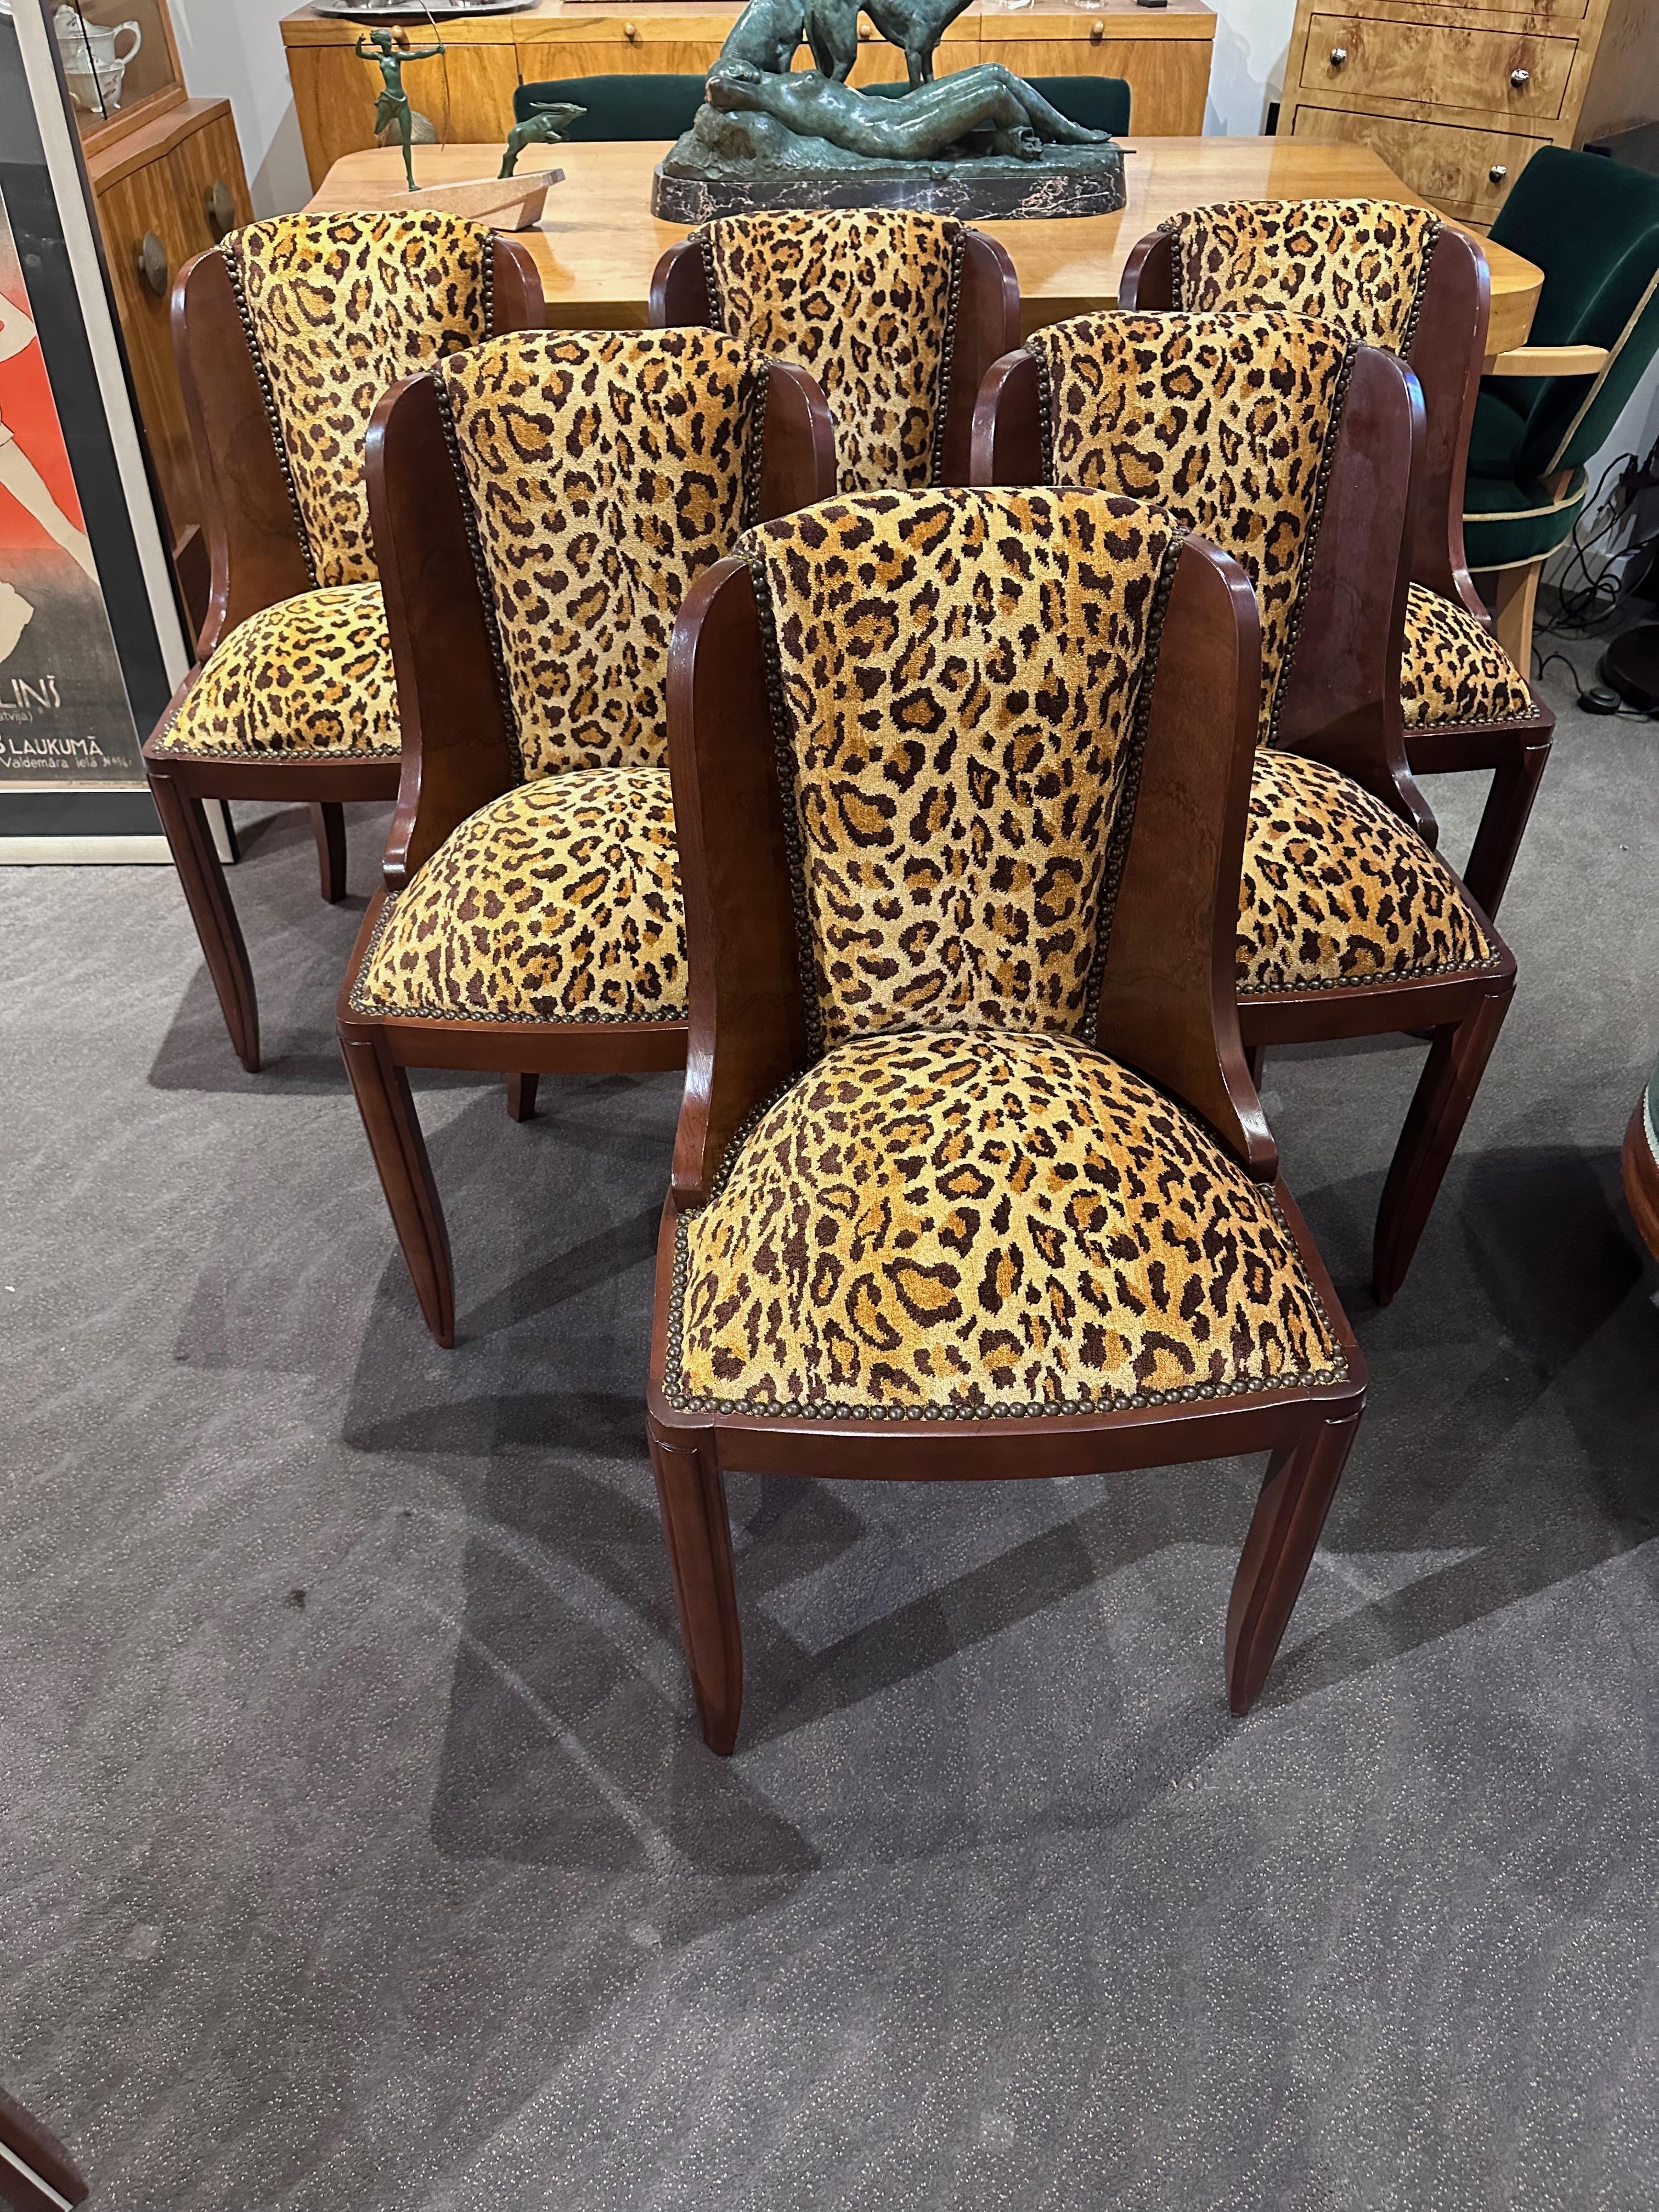 Art Deco Barrel dining – office chairs with custom leopard fabric. 6 Original French chairs with meticulous care. Each chair was disassembled, revealing the intricate blend of hardwood, and original springs, and refinished so they could be updated